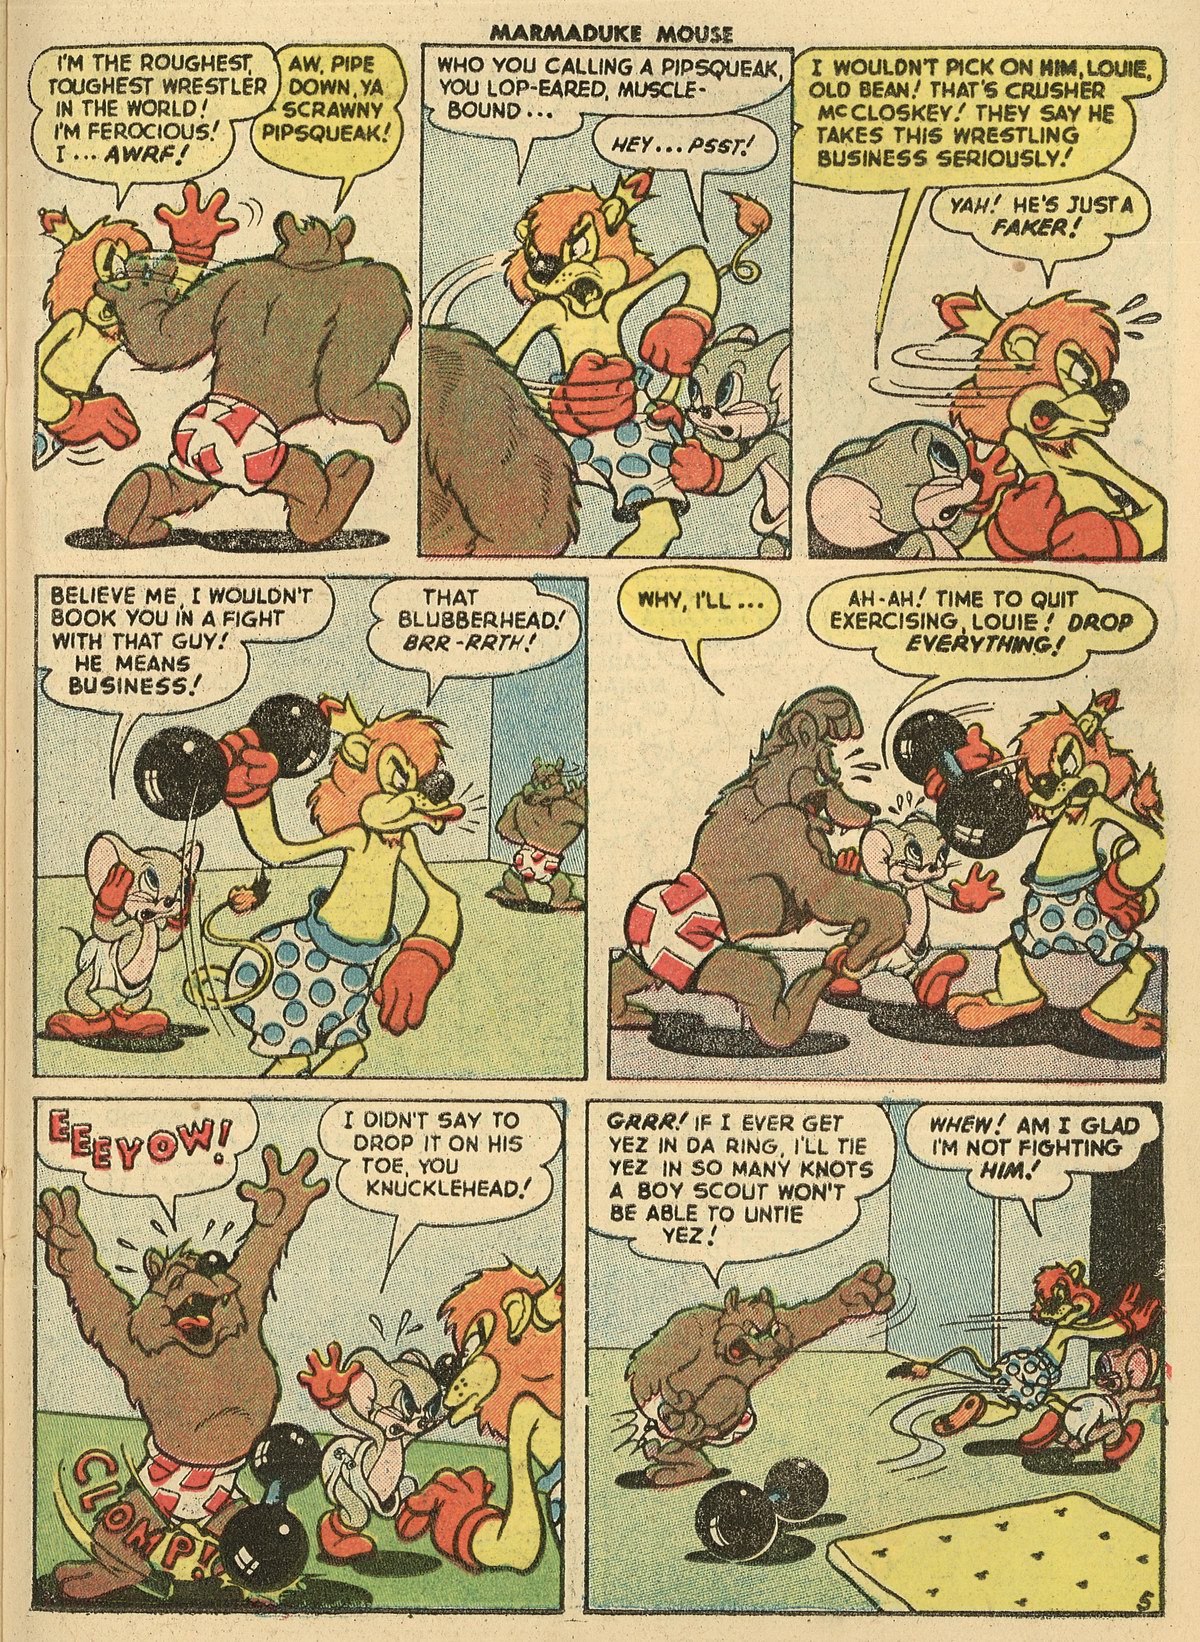 Read online Marmaduke Mouse comic -  Issue #56 - 23